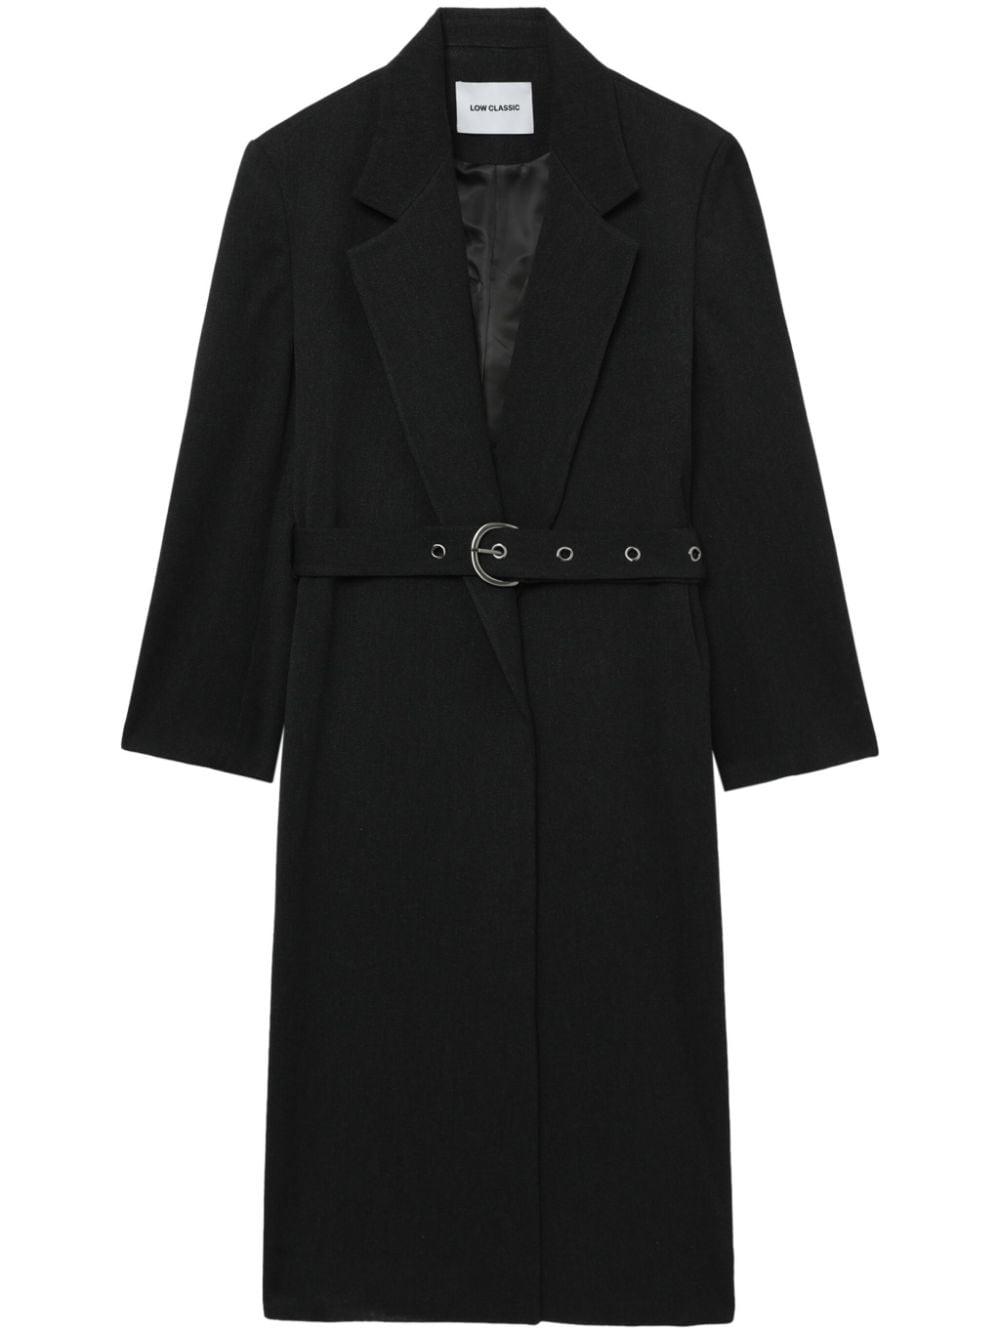 Low Classic belted single-breasted coat - Black von Low Classic